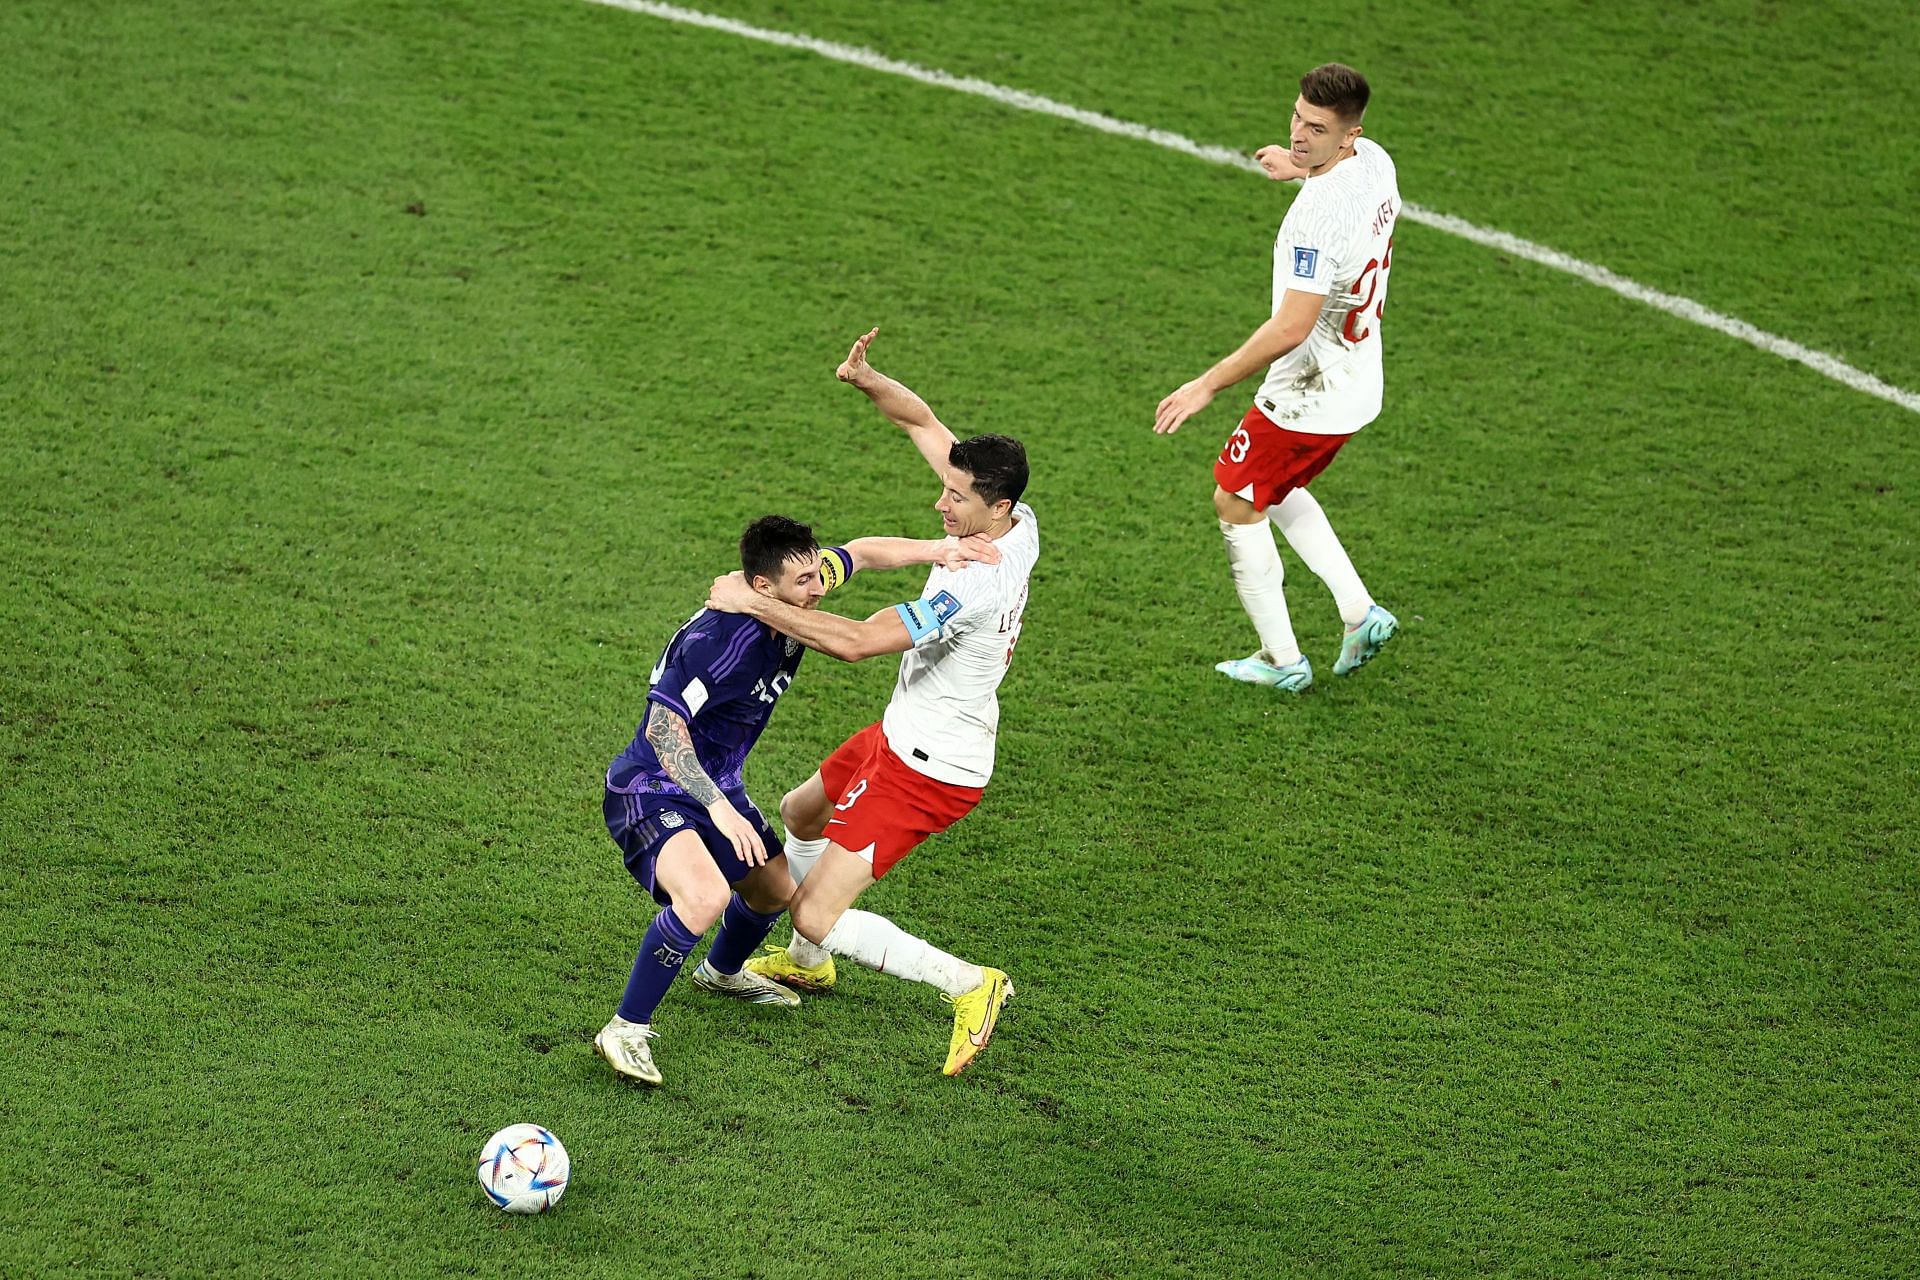 Lionel Messi and Robert Lewandowski facing each other at the World Cup